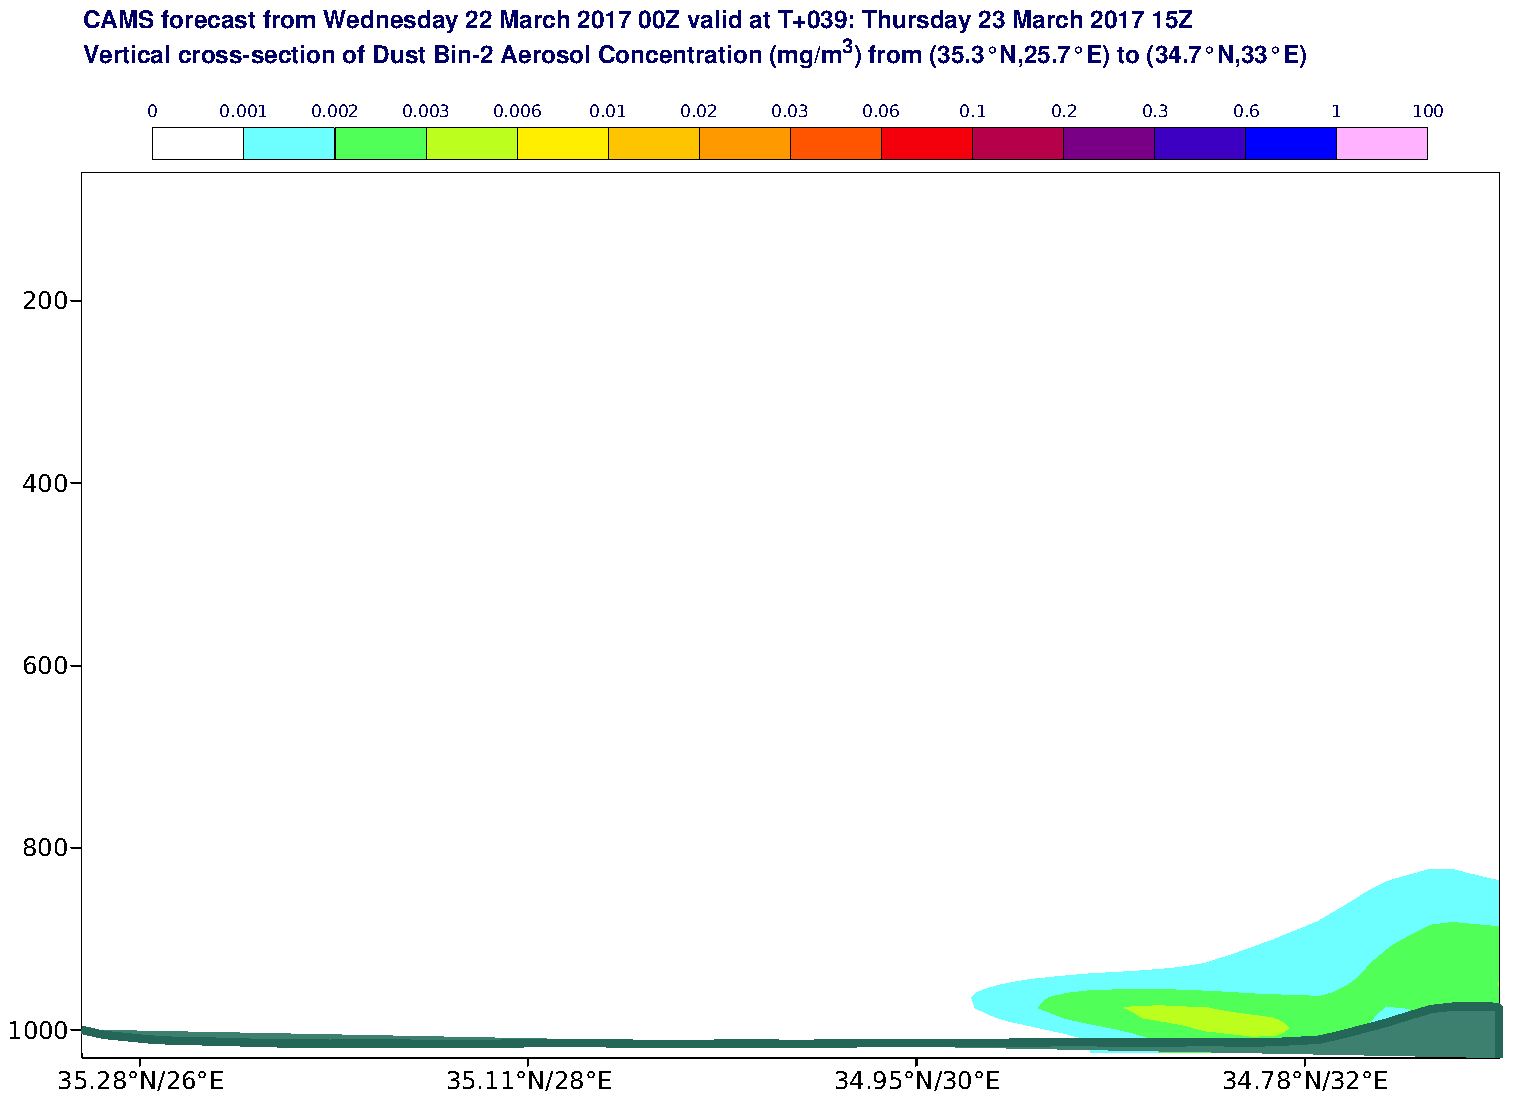 Vertical cross-section of Dust Bin-2 Aerosol Concentration (mg/m3) valid at T39 - 2017-03-23 15:00